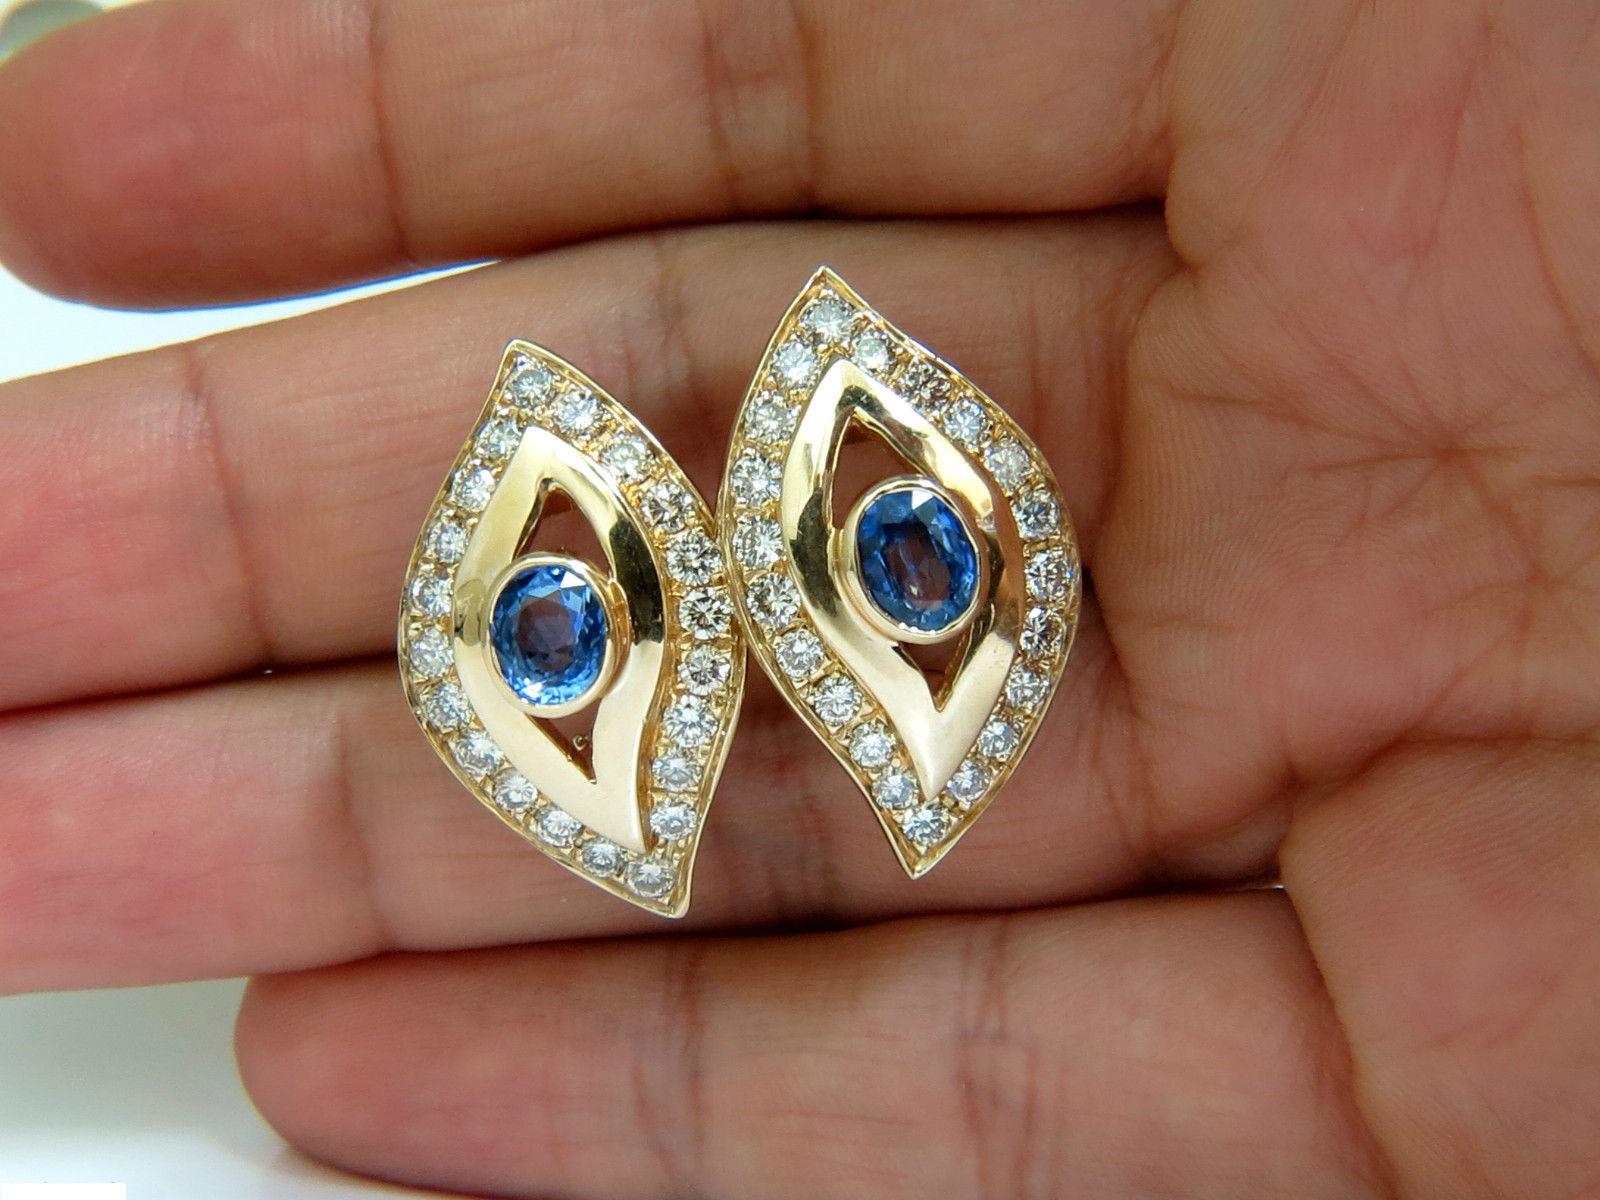 Glamour Revisted

2.00ct. Natural Sapphires

Clean clarity, full oval cuts and transparent.

Gorgeous Cornflower blues



Diamonds: 2.75ct.

full cut rounds

 I-J color 

 Vs-2 Si-1 clarity.

14KT yellow gold.

14 grams

Comfortable omega